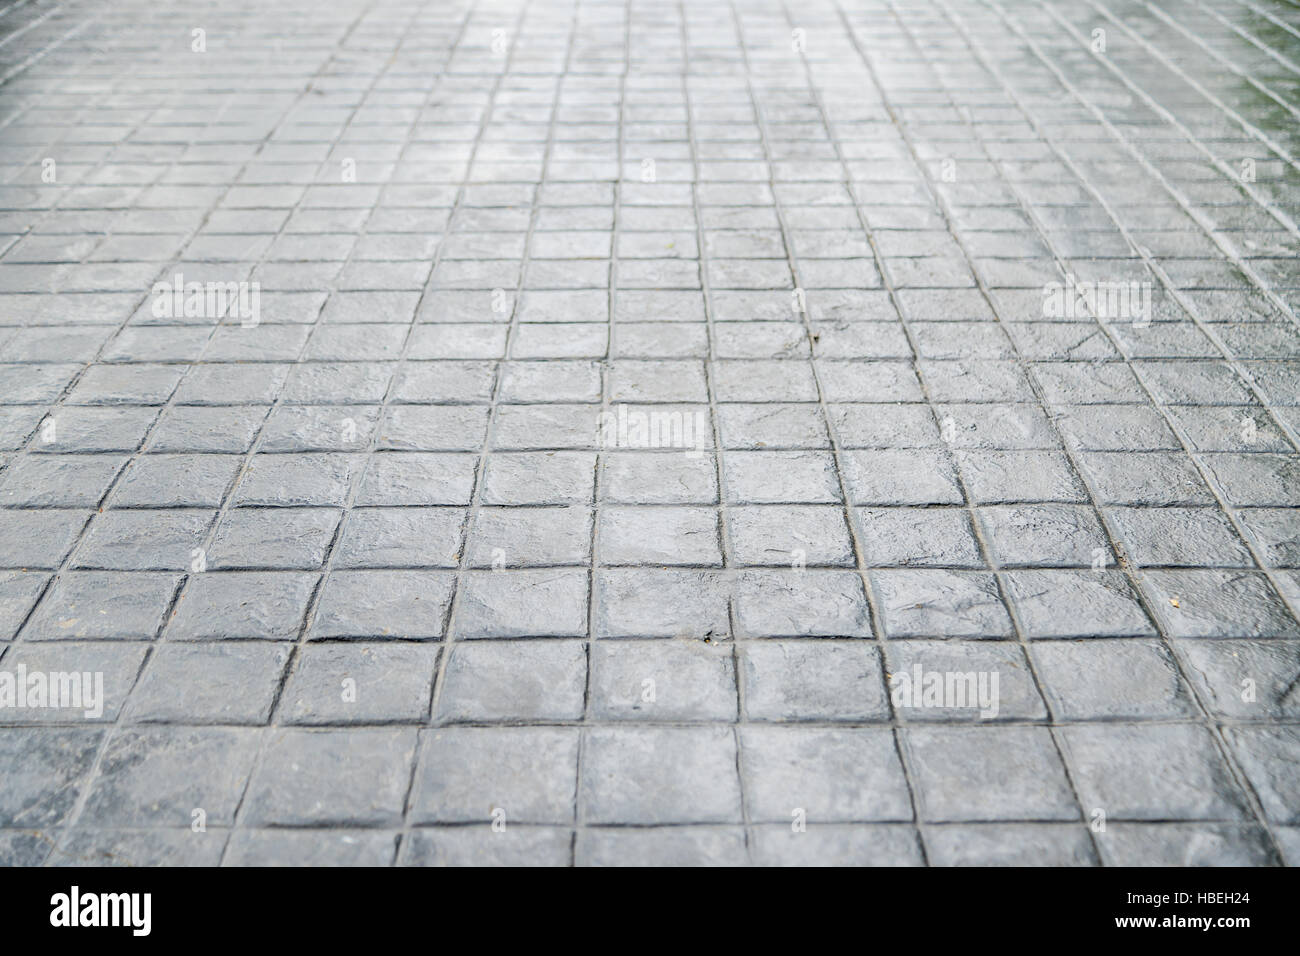 stone pavement in perspective Stock Photo